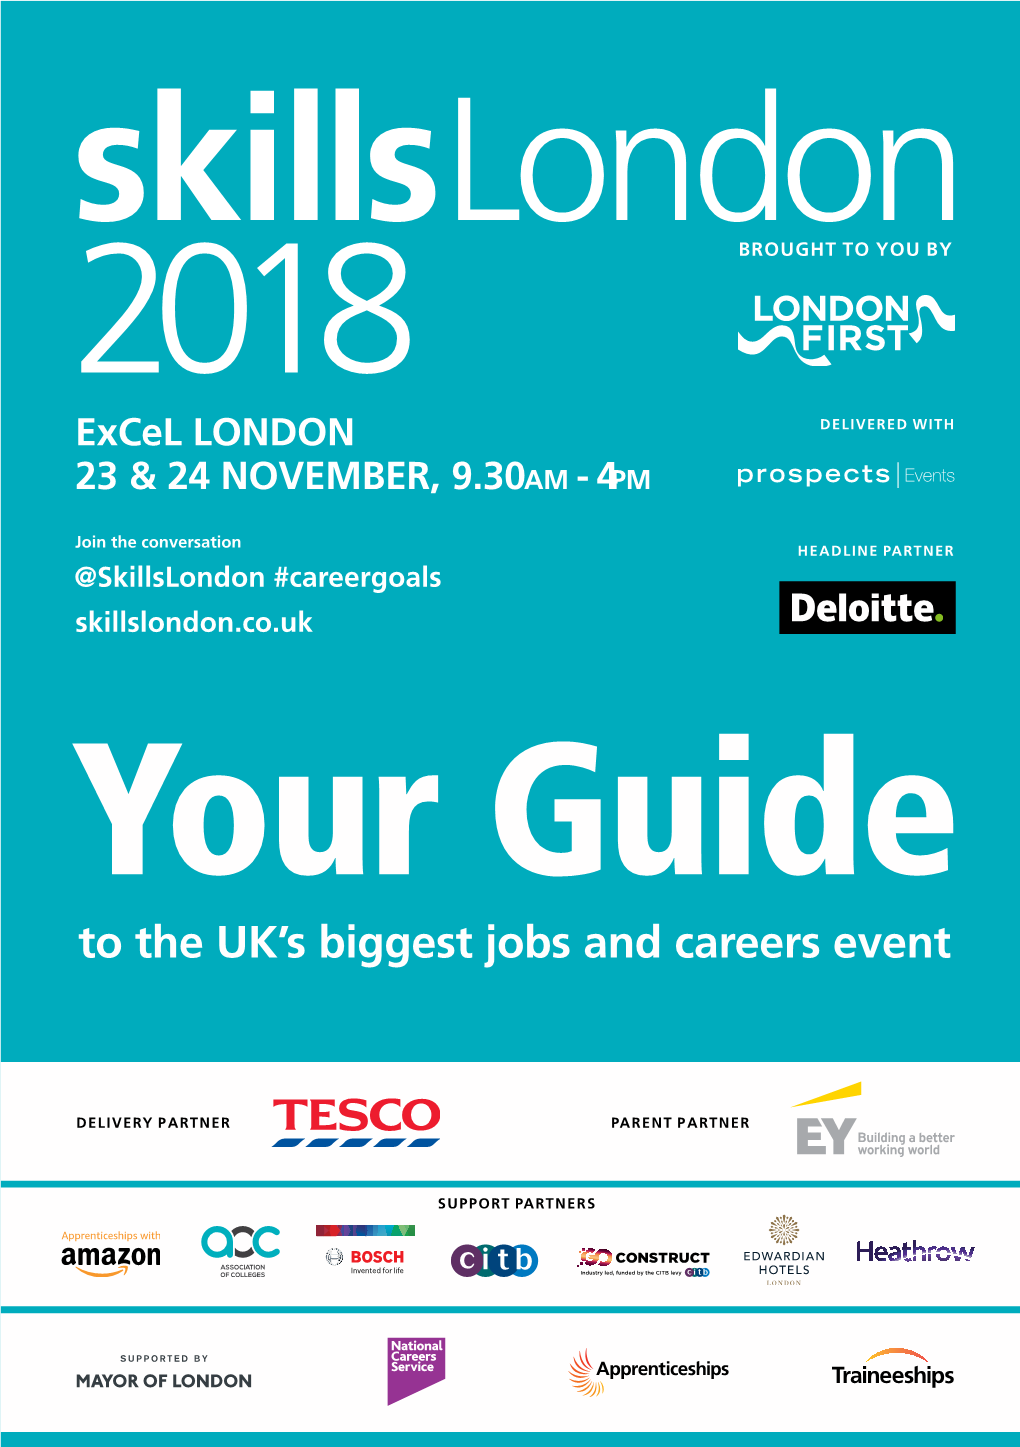 To the Uk's Biggest Jobs and Careers Event